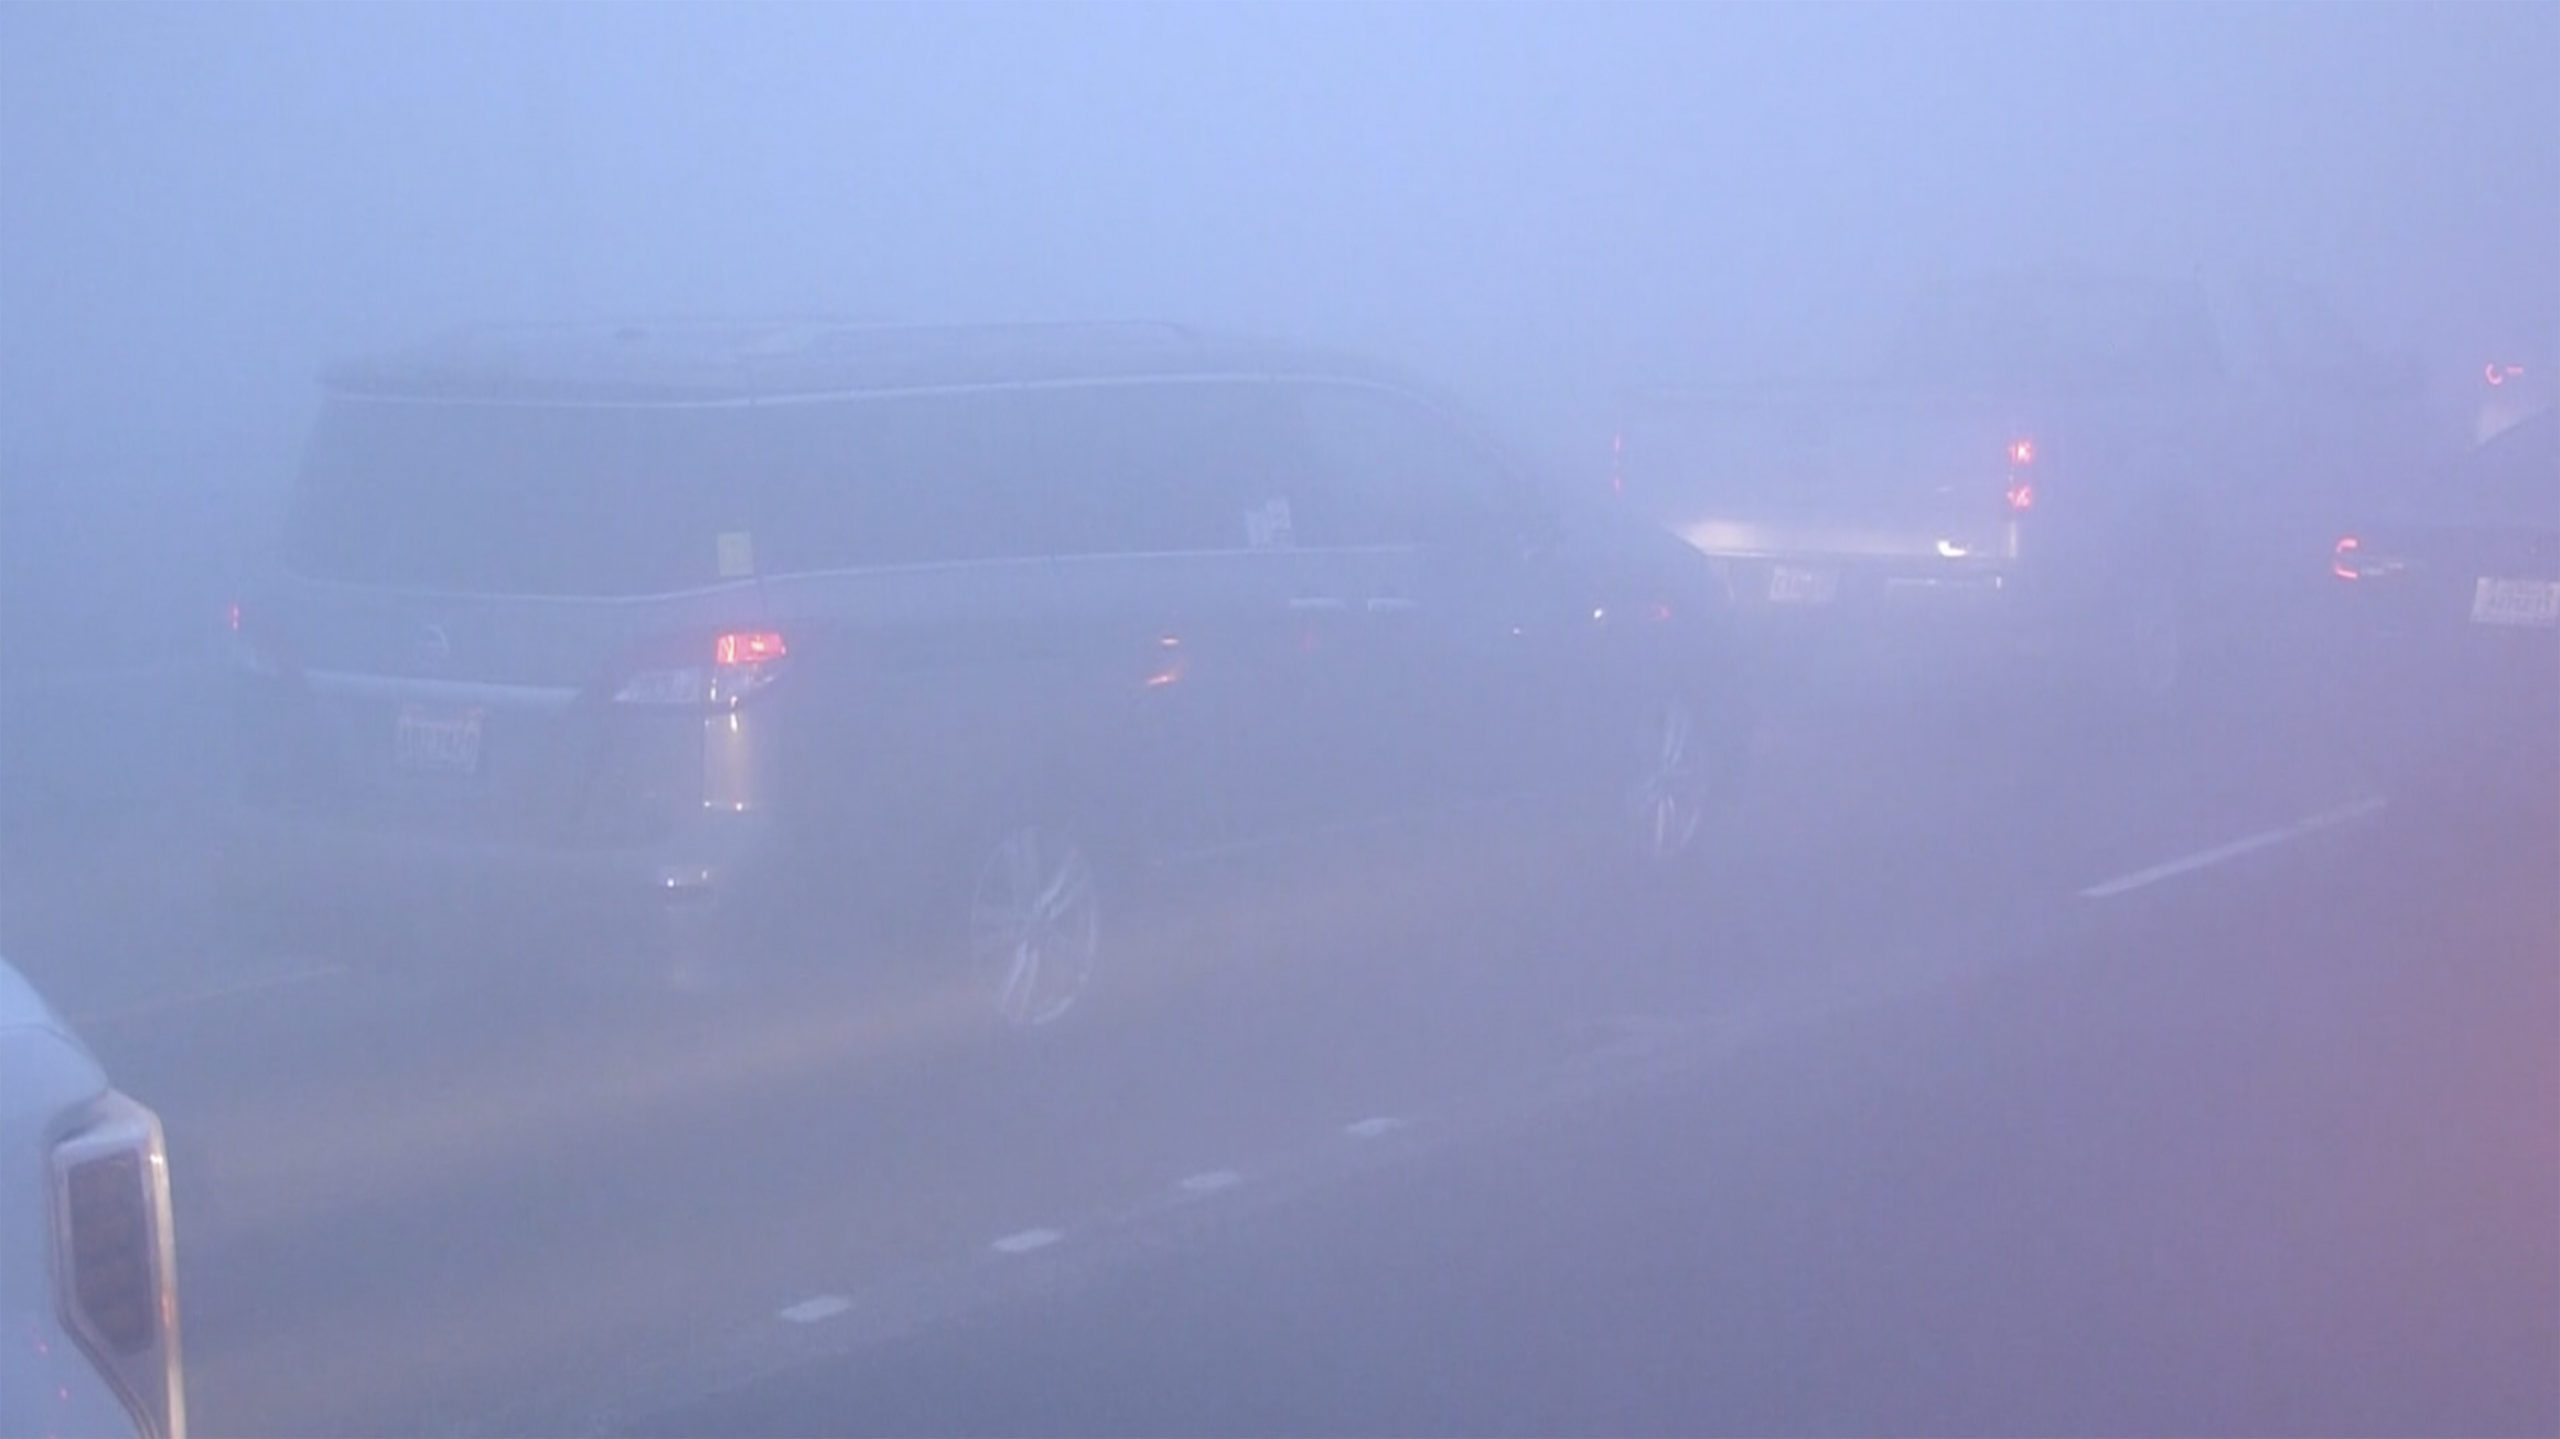 Traffic reached a standstill on I-10 in Louisiana after a "super fog" caused a deadly crash on Tuesday.